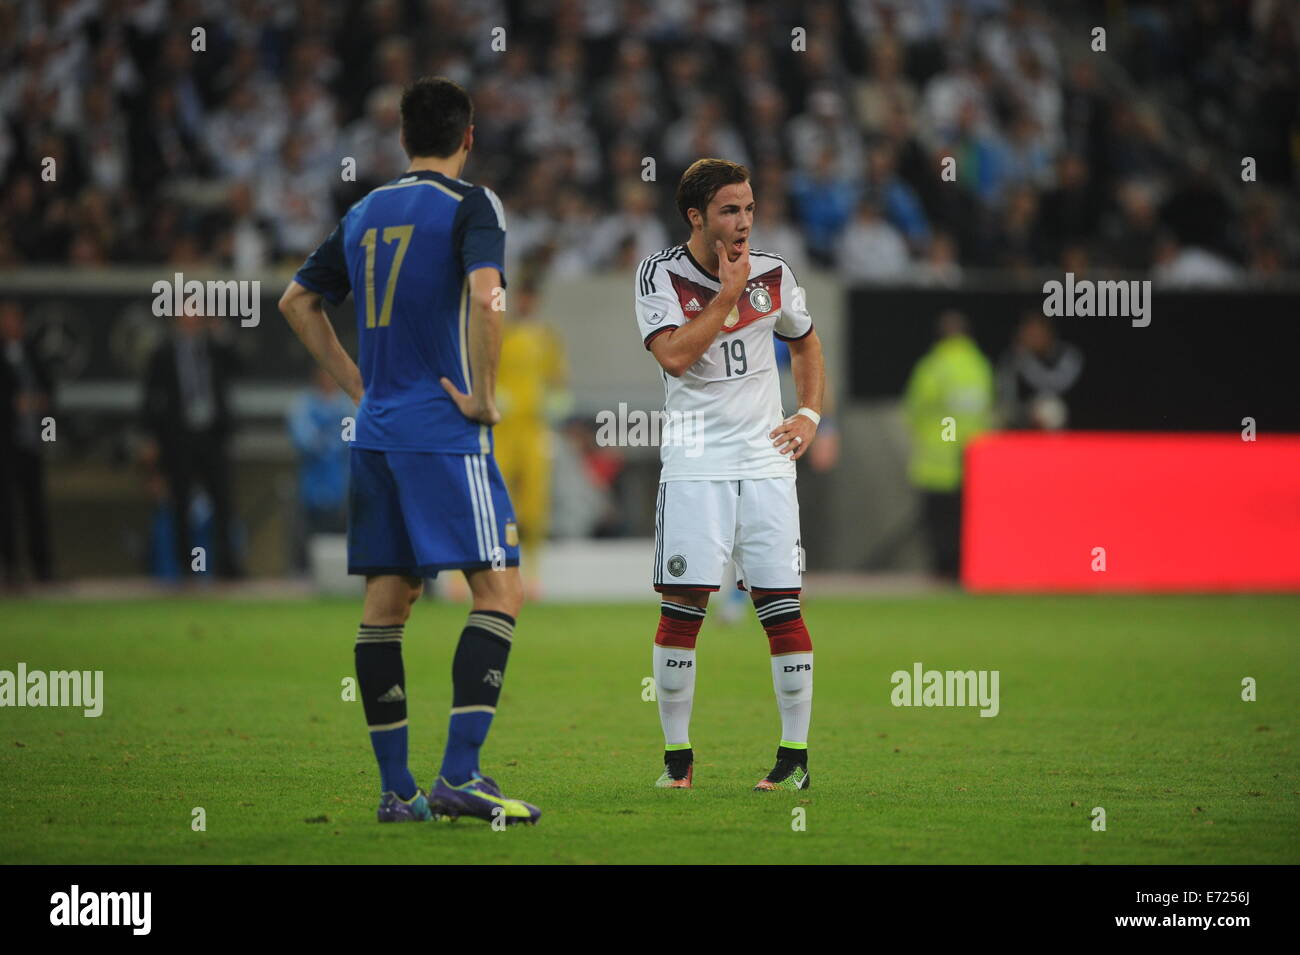 Esprit Arena, Duesseldorf, Germany. 3rd Sep, 2014. Germany's Mario Goetze and Argentina's Federico Fernandez stand on the pitch during the soccer friendly between Germany and Argentina at Esprit Arena, Duesseldorf, Germany, 3 September 2014. Photo: Jonas Guettler/dpa/Alamy Live News Stock Photo